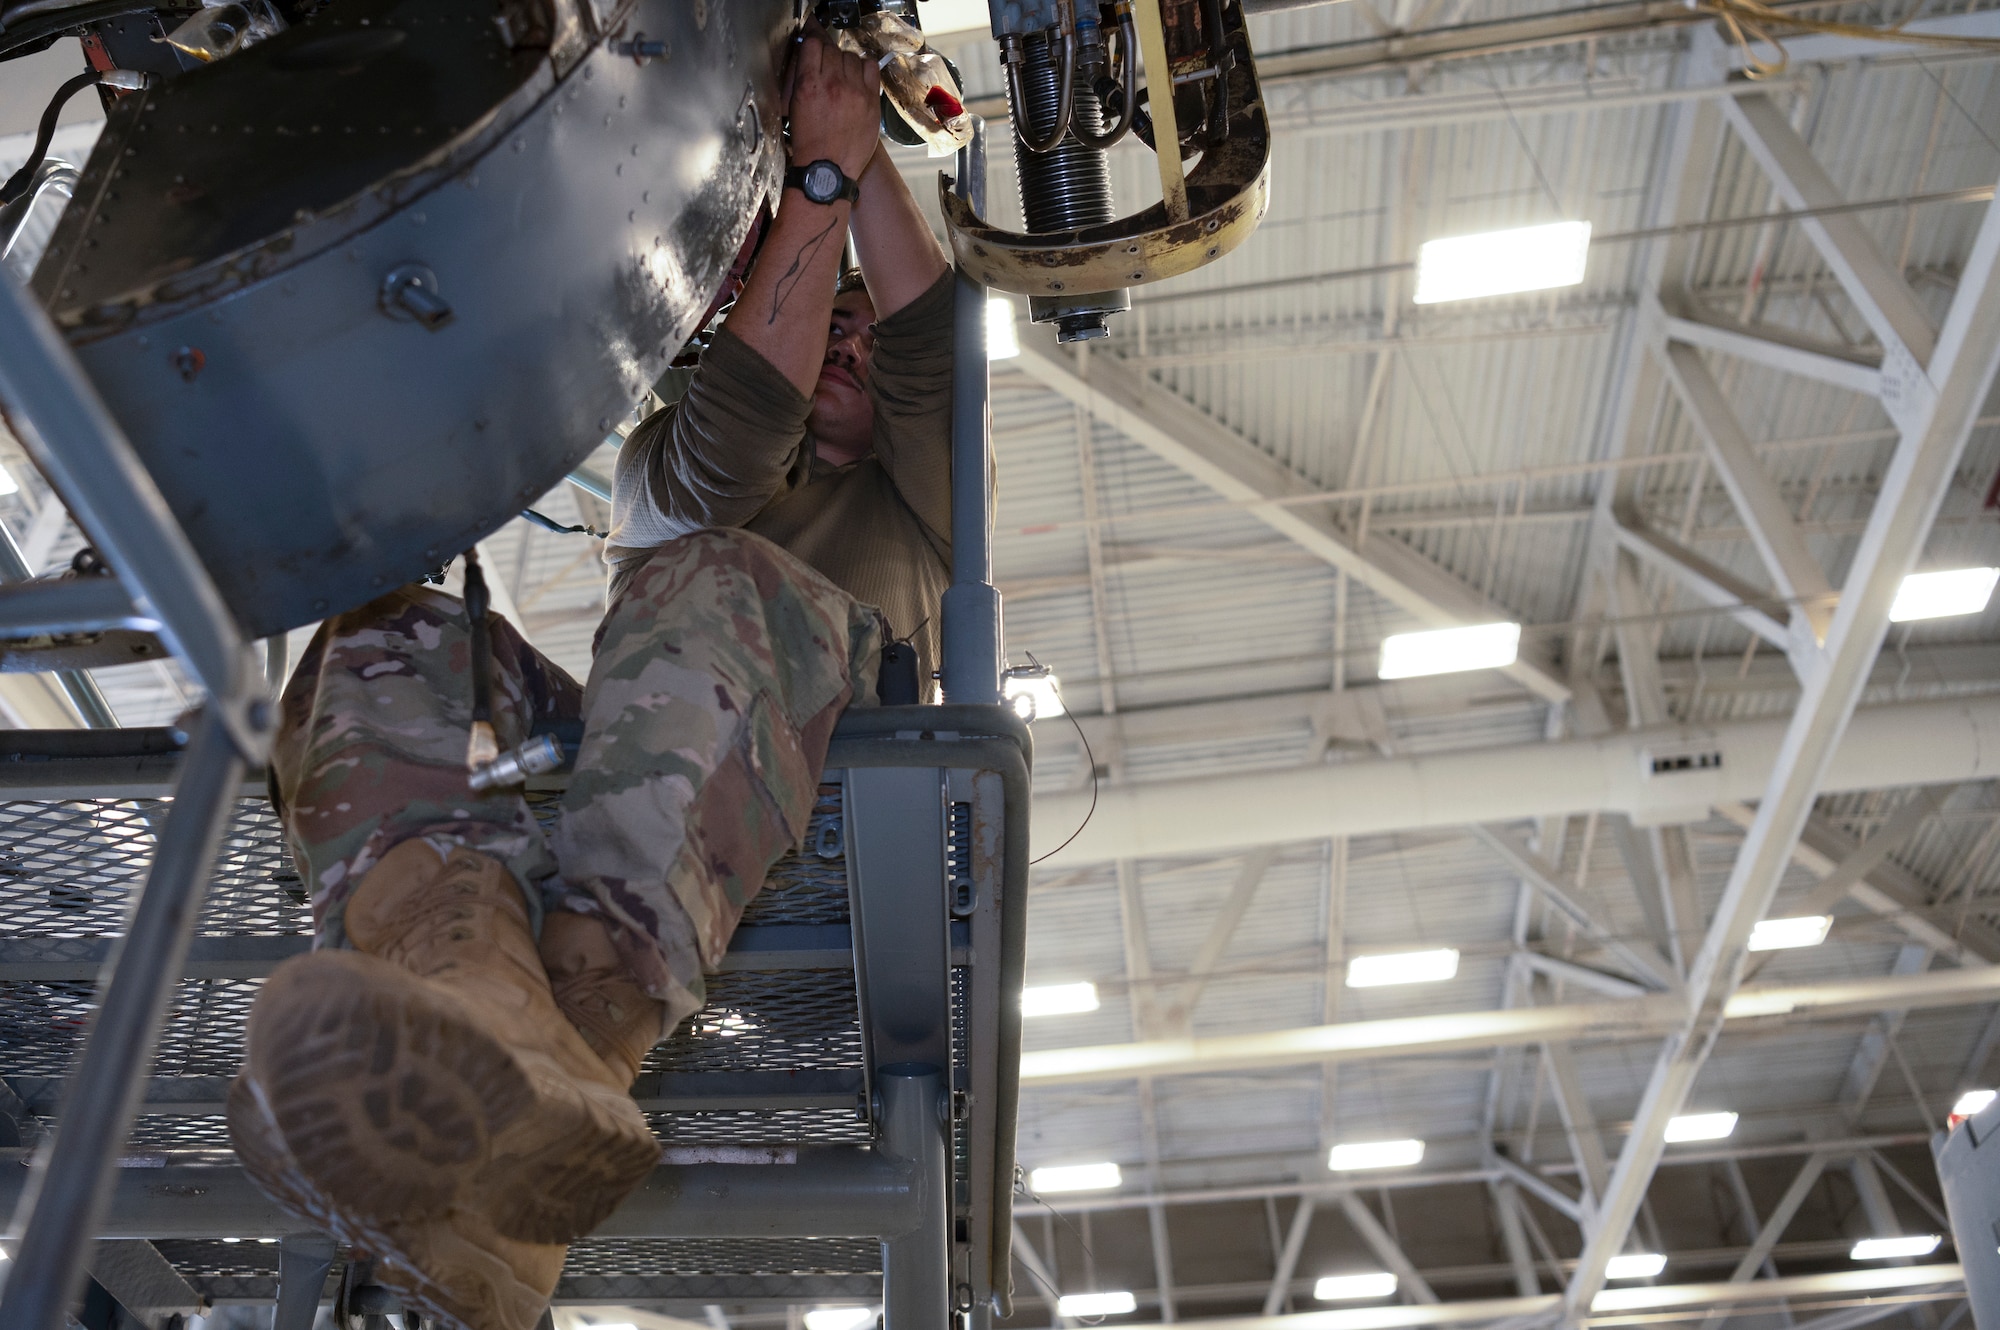 Senior Airman Thomas Perez, an 801st Special Operations Aircraft Maintenance Squadron CV-22 Osprey crew chief, installs an inboard proprotor gearbox horizontal fire baffle during maintenance at Independence Hangar on Hurlburt Field, Fla., Feb15, 2022. The mission of the CV-22 is to conduct long-range infiltration, exfiltration, and resupply missions for special operations forces.